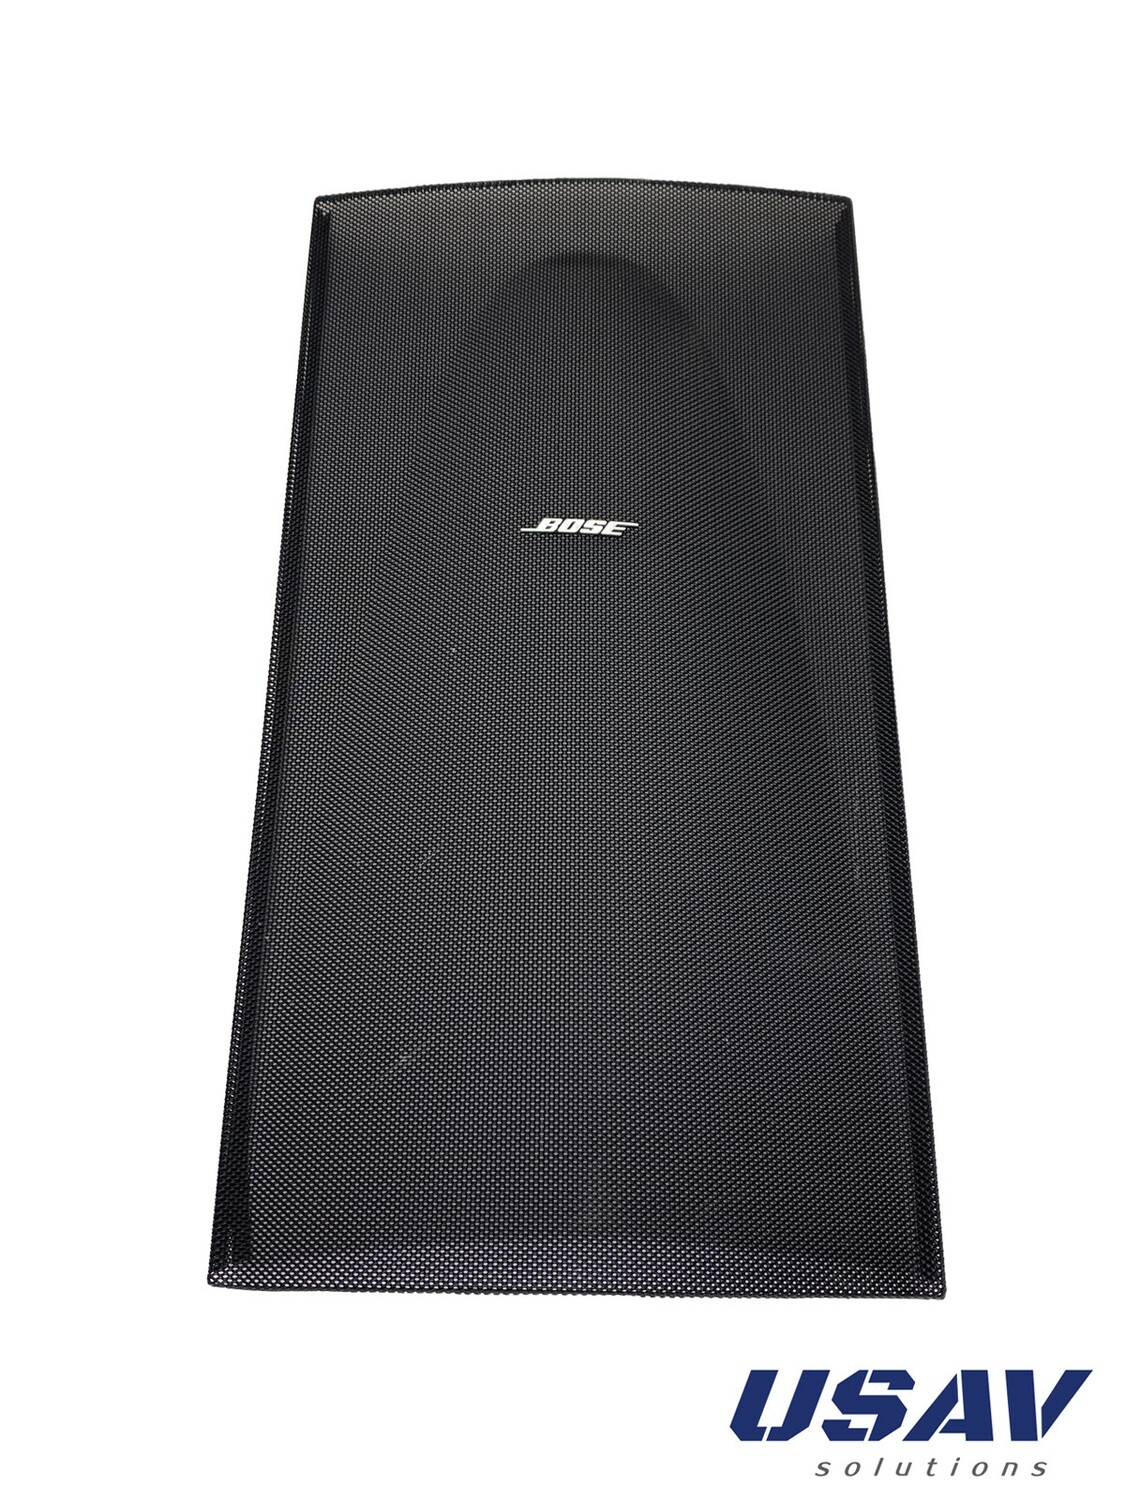 Bose PS28 Powered (GRILL) Subwoofer Original REPLACEMENT GRILL Only